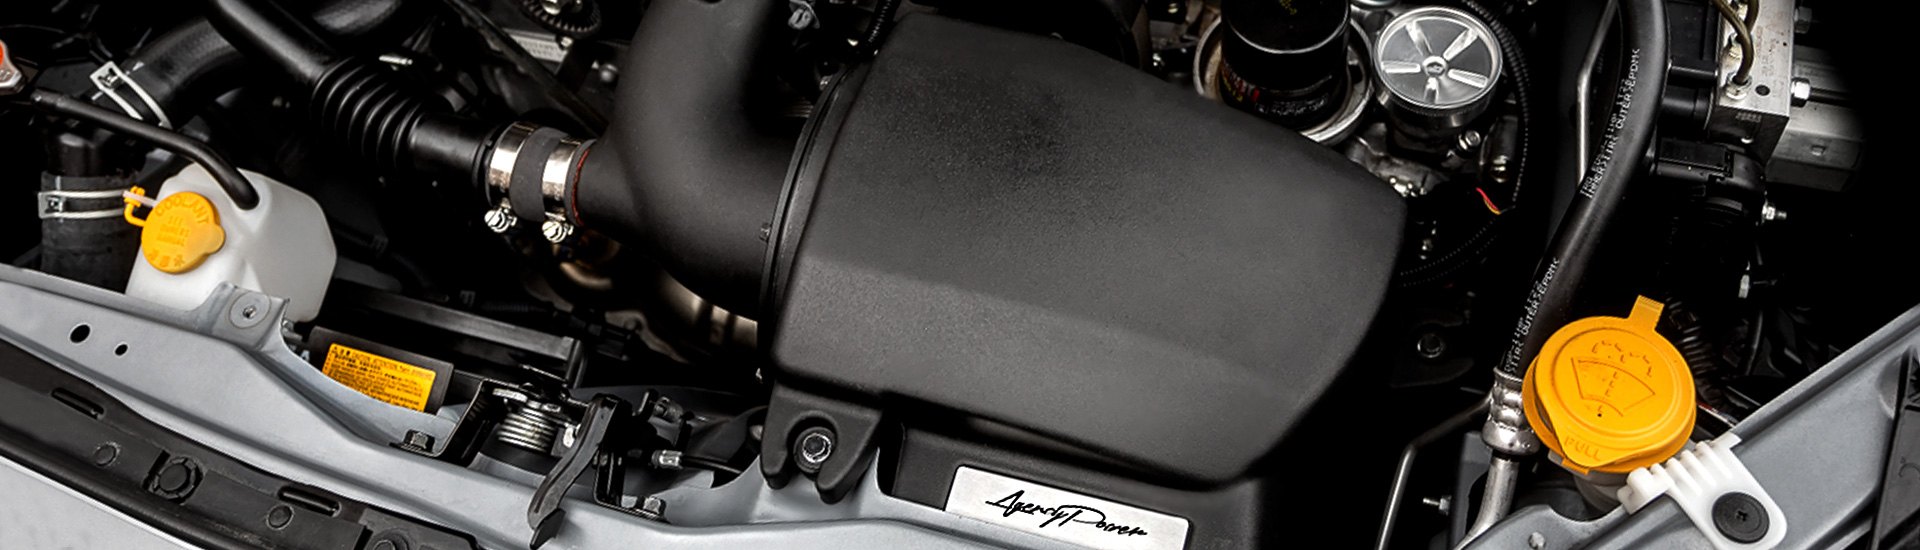 Our Sneak-Peek At Agency Power’s New Cold Air Intake Kit for FR-S | GT-86 | BRZ